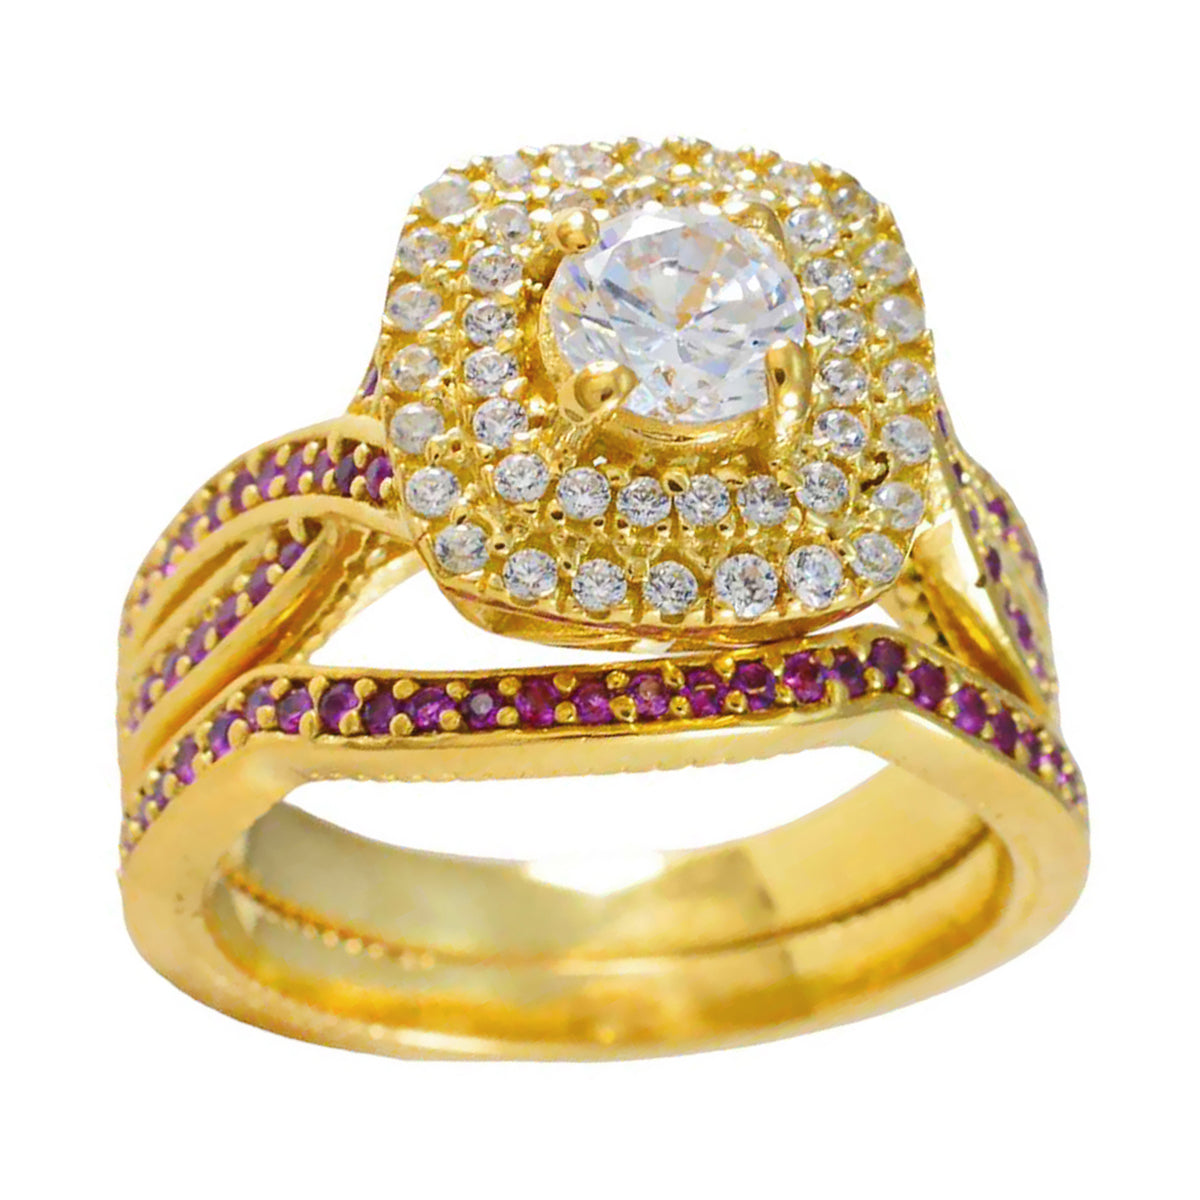 Riyo Classical Silver Ring With Yellow Gold Plating Ruby CZ Stone Round Shape Prong Setting Ring